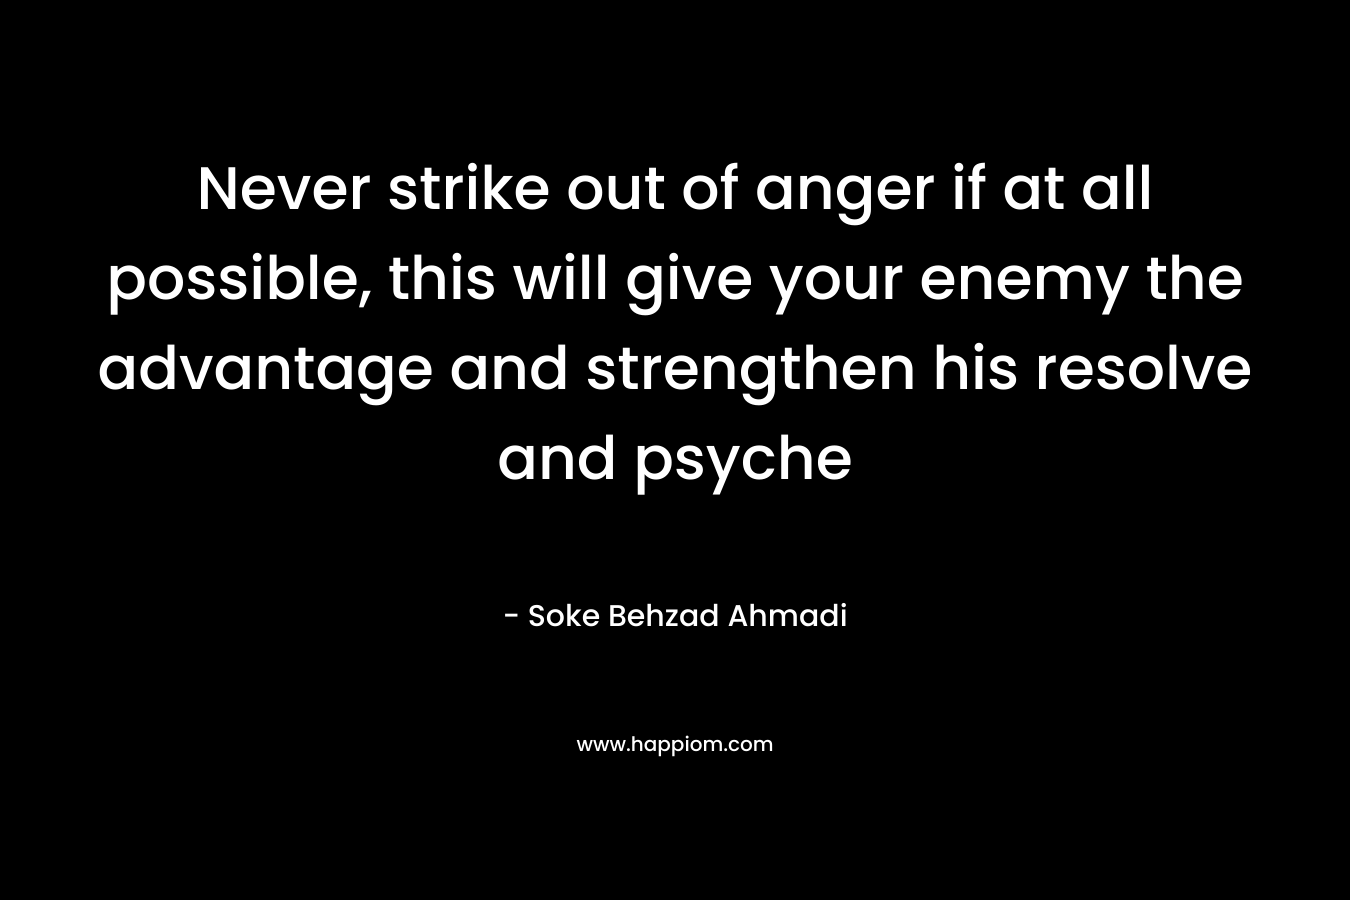 Never strike out of anger if at all possible, this will give your enemy the advantage and strengthen his resolve and psyche – Soke Behzad Ahmadi